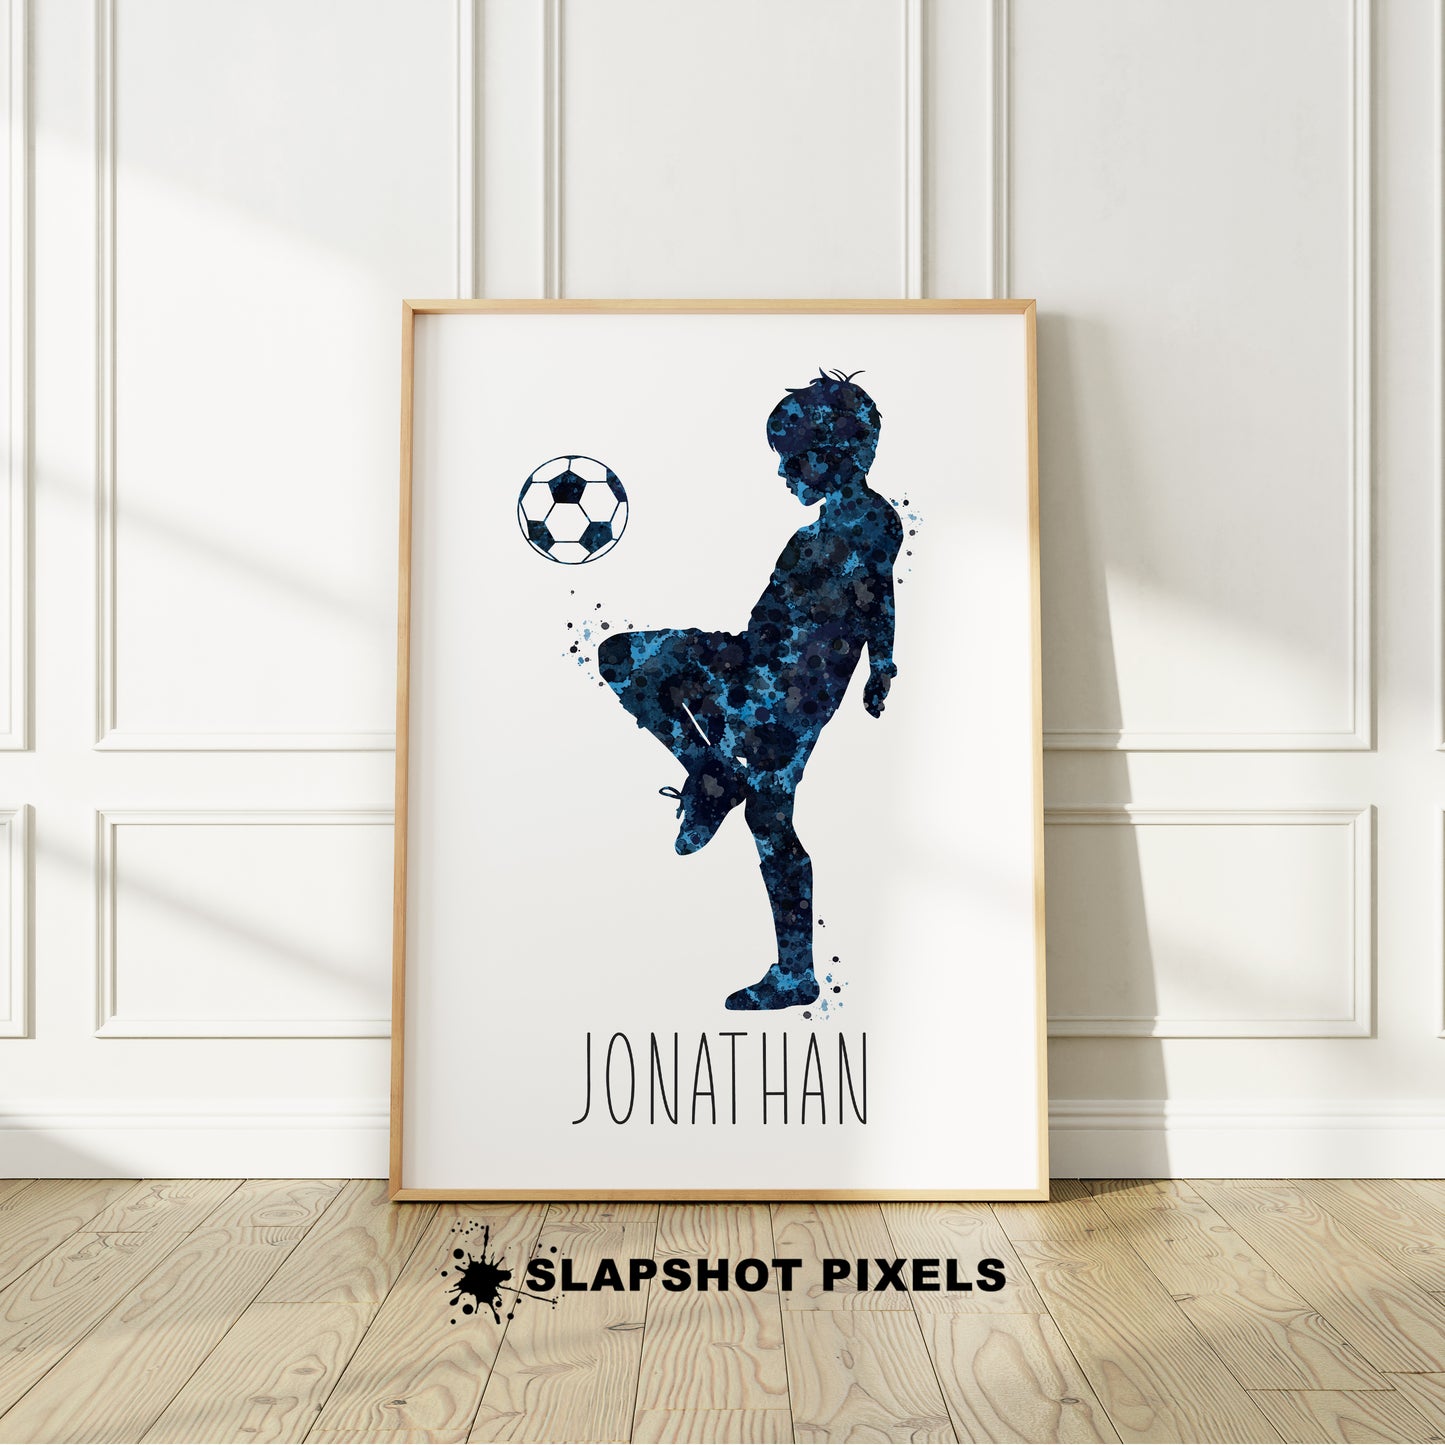 Personalized soccer poster showing little boy soccer player bouncing soccer ball on his knee with custom name under player. Designed in yellow and black watercolor splatters. Perfect soccer gifts for boys, soccer team gifts, soccer coach gift, soccer wall art décor, football prints and soccer bedroom.